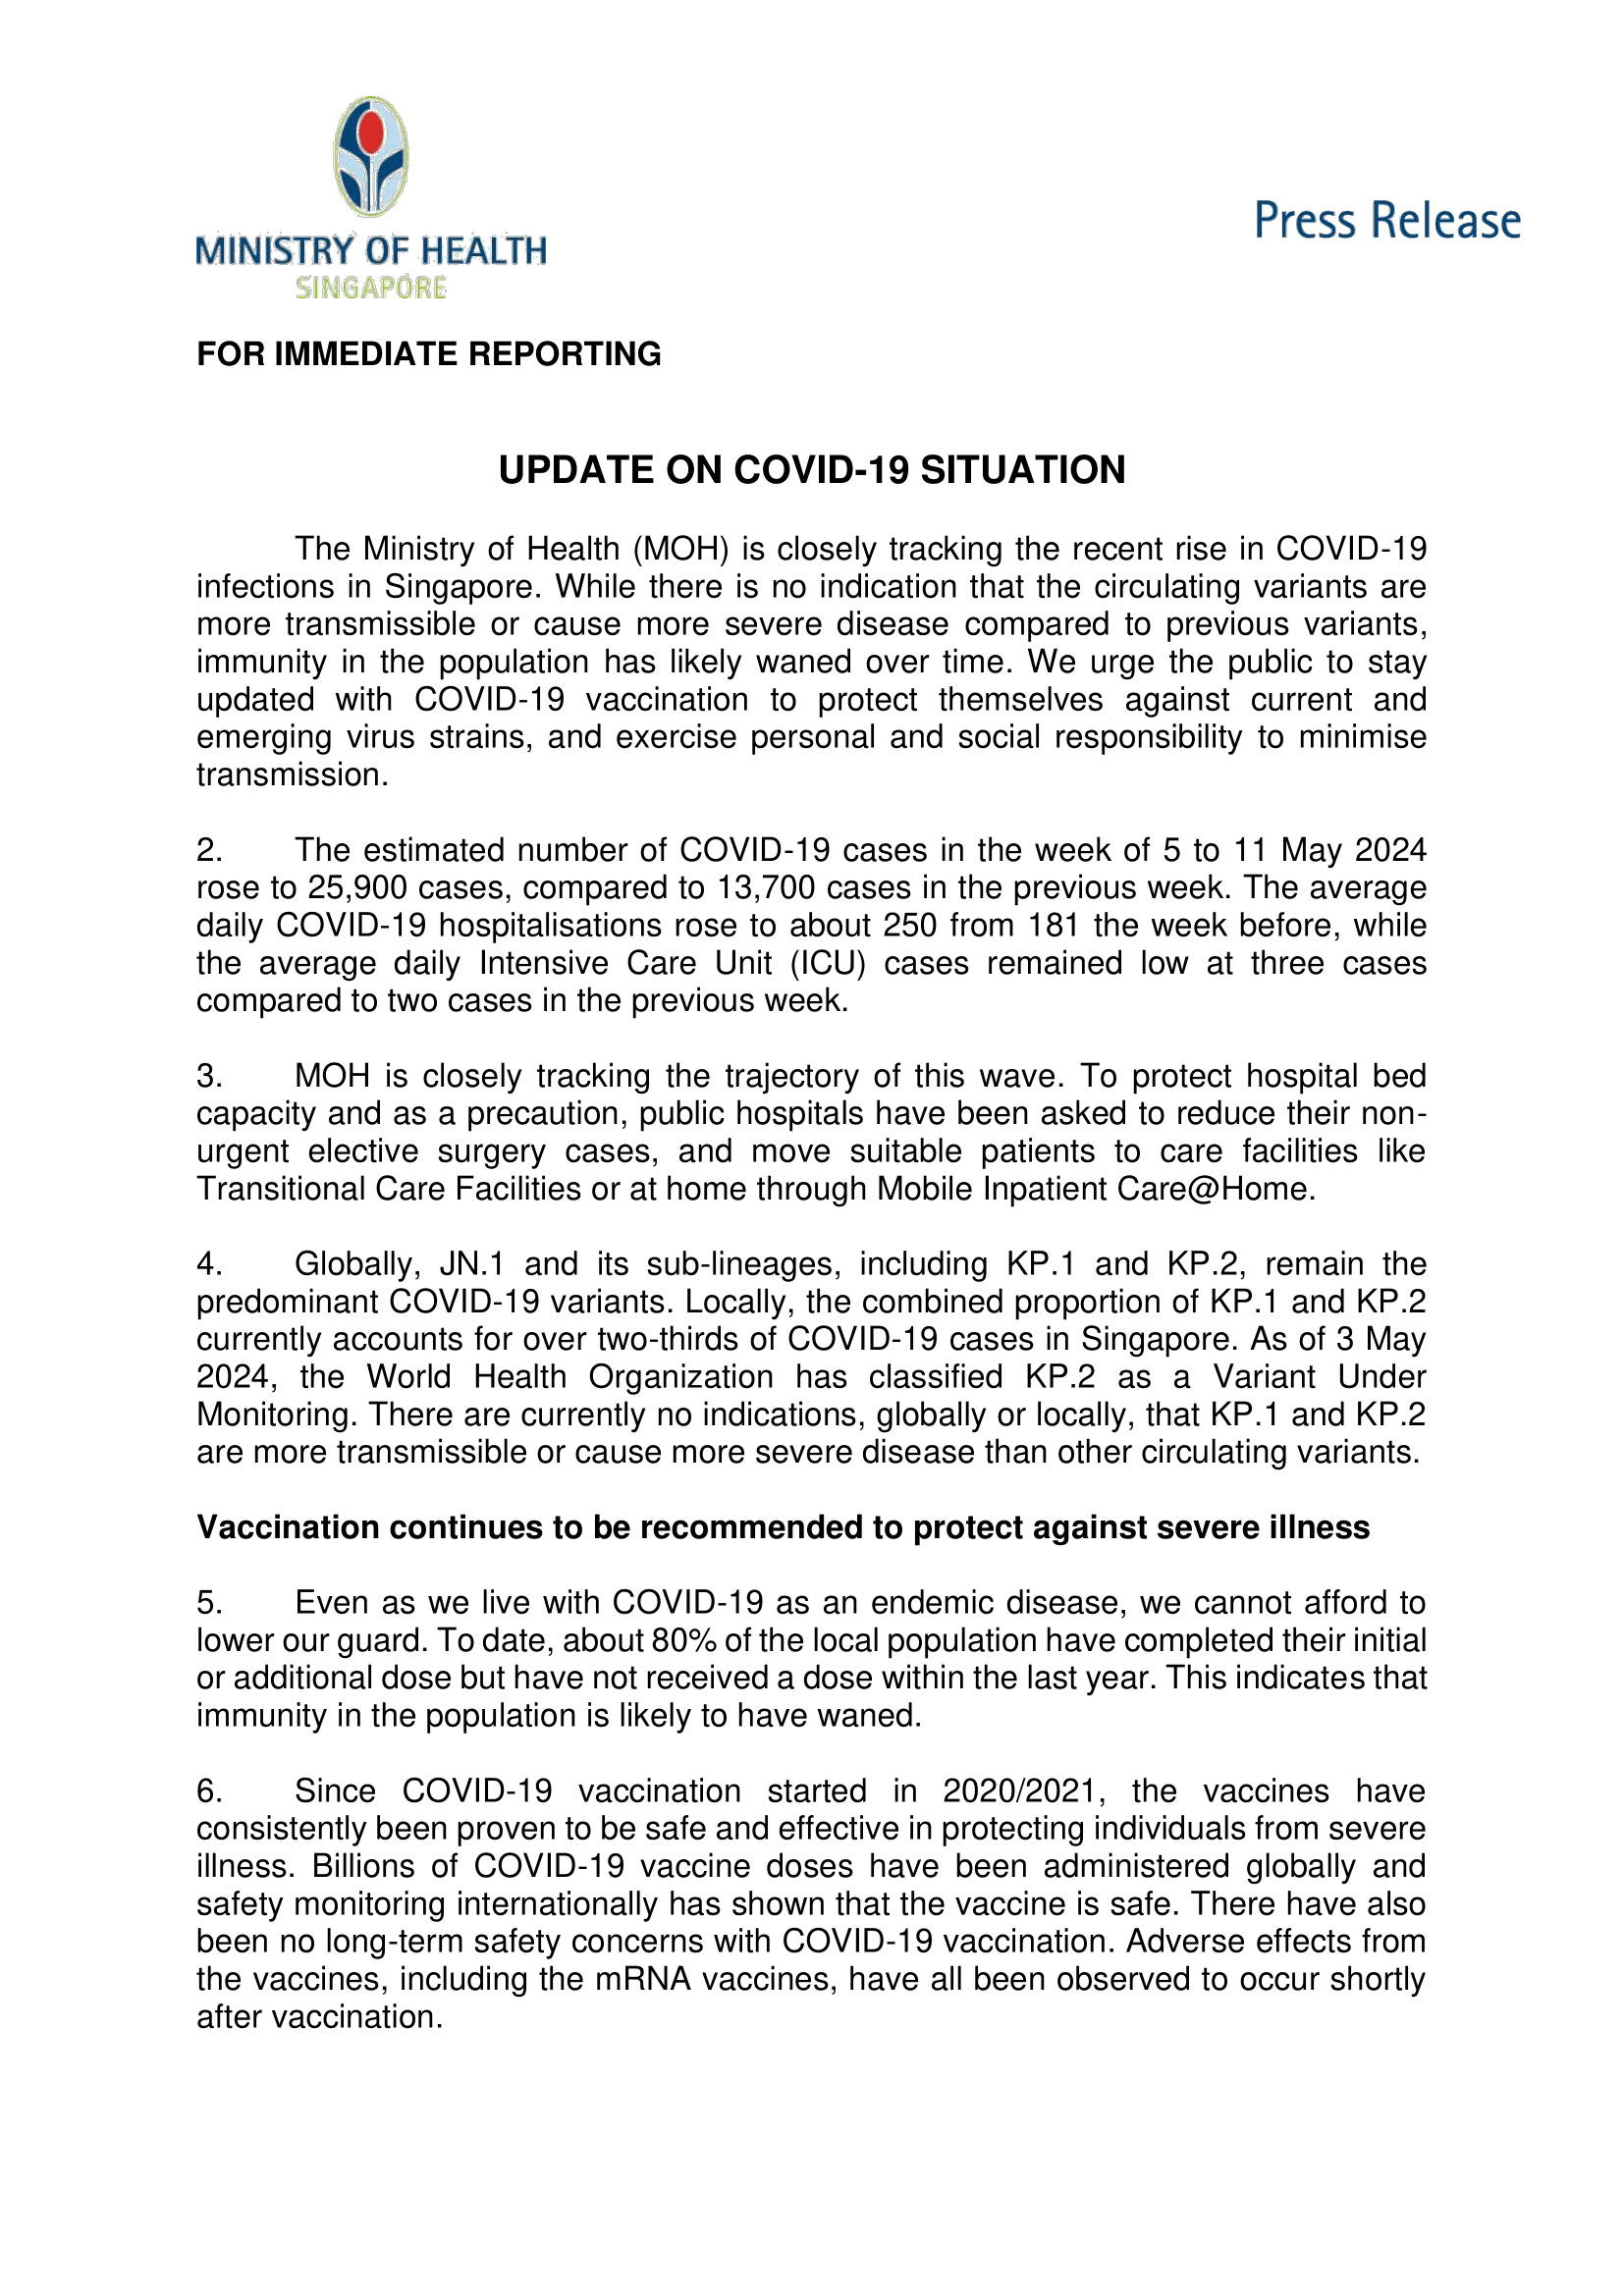 [MOH Connected] Press Release - Update on Local COVID-19 Situation May 2024 v2-1.png